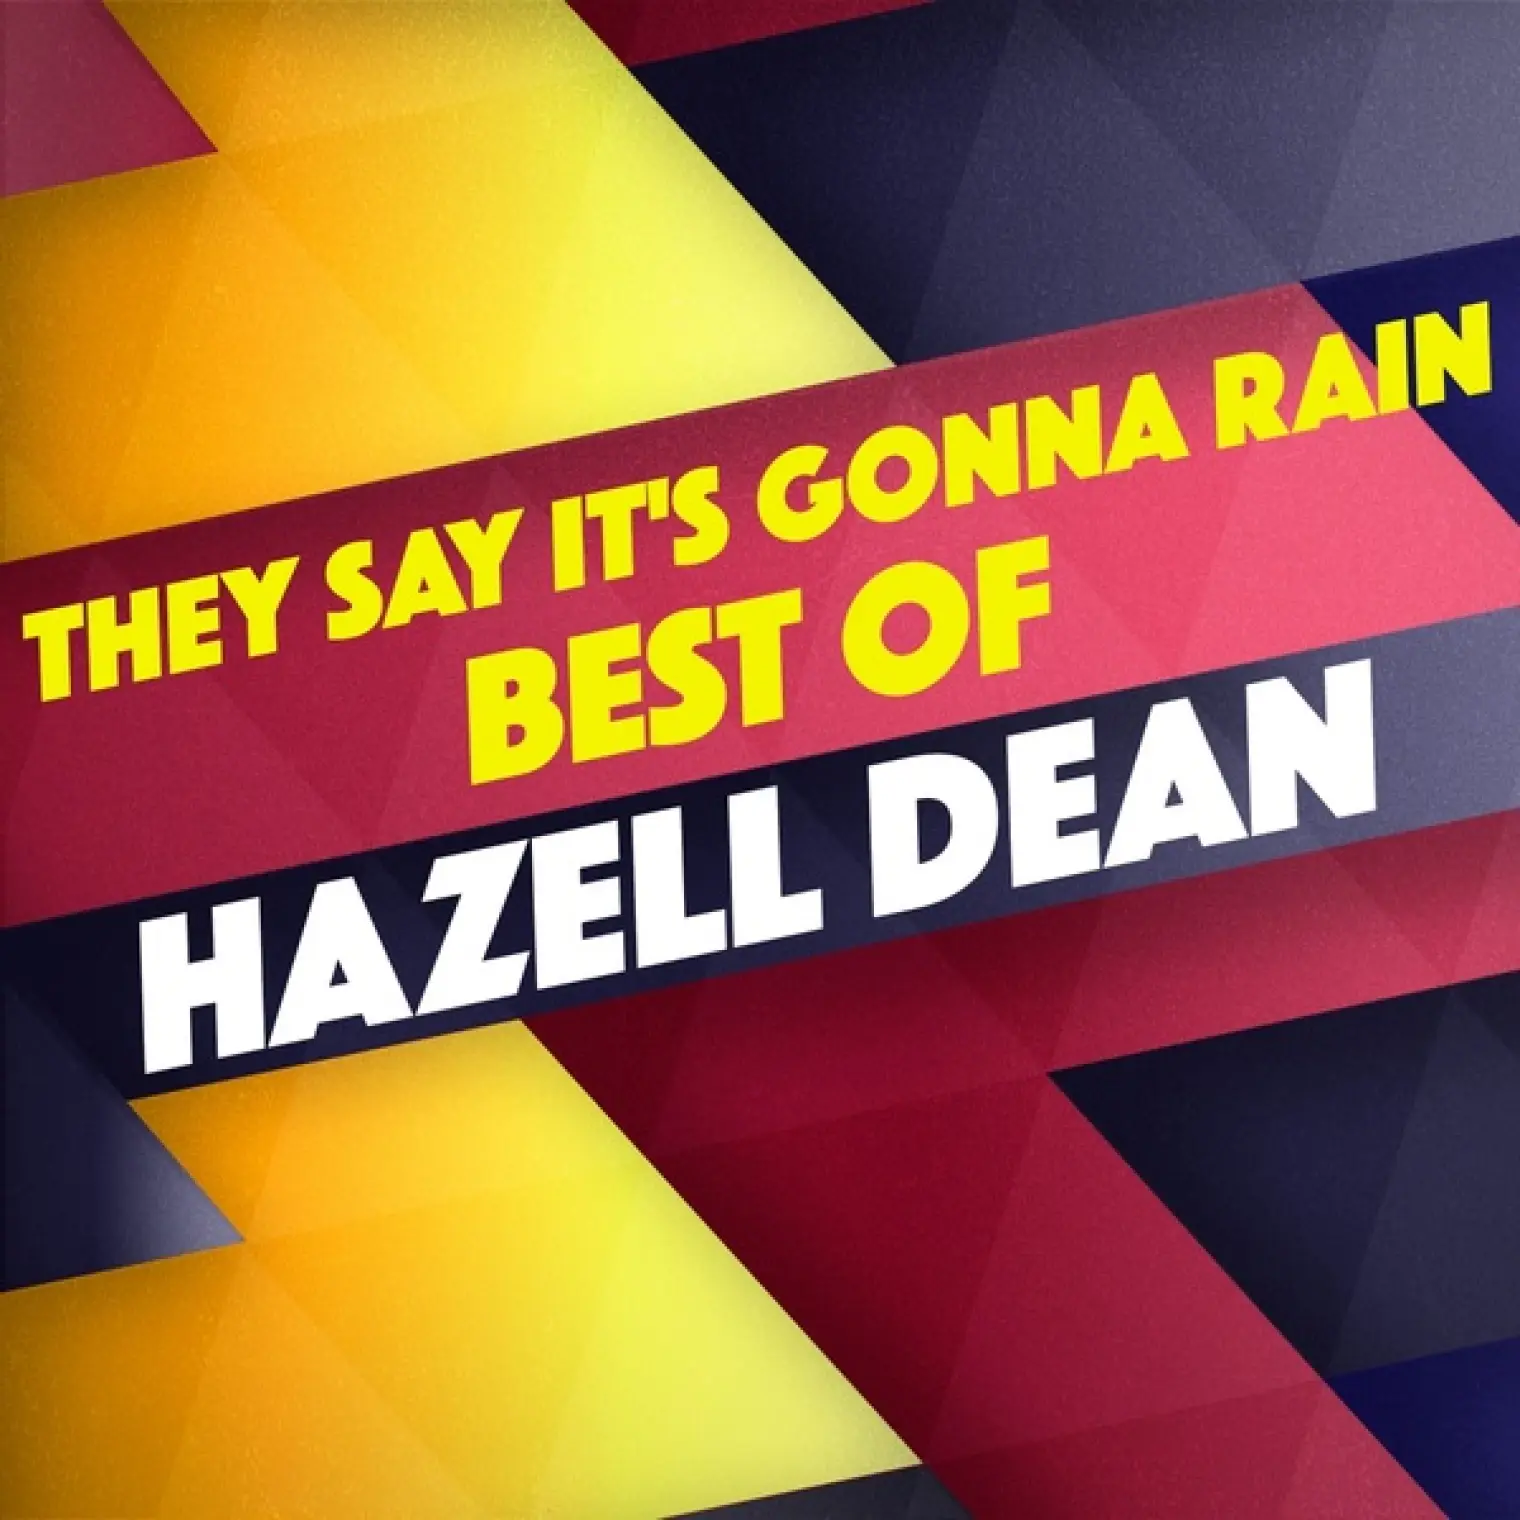 They Say It's Gonna Rain - Best Of (Rerecorded) -  Hazell Dean 